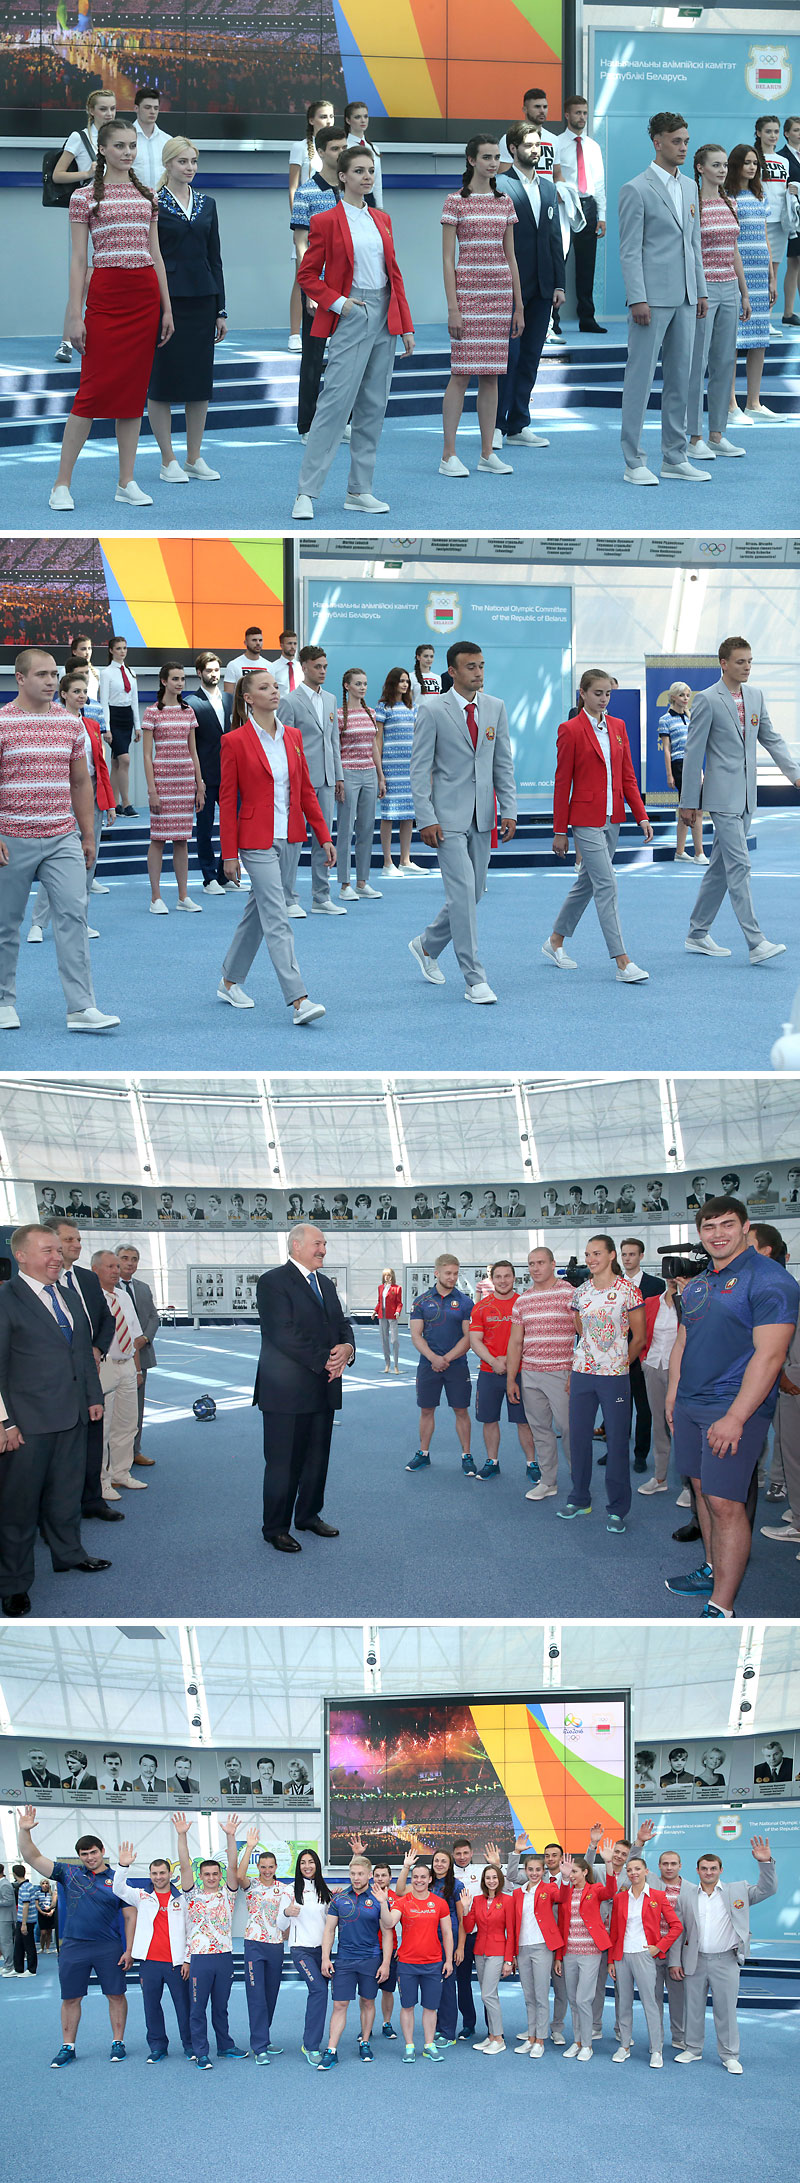 Ceremony and performance uniforms of Team Belarus at the 31st Summer Olympics in Rio de Janeiro were unveiled in a ceremony in the National Olympic Committee on 27 June